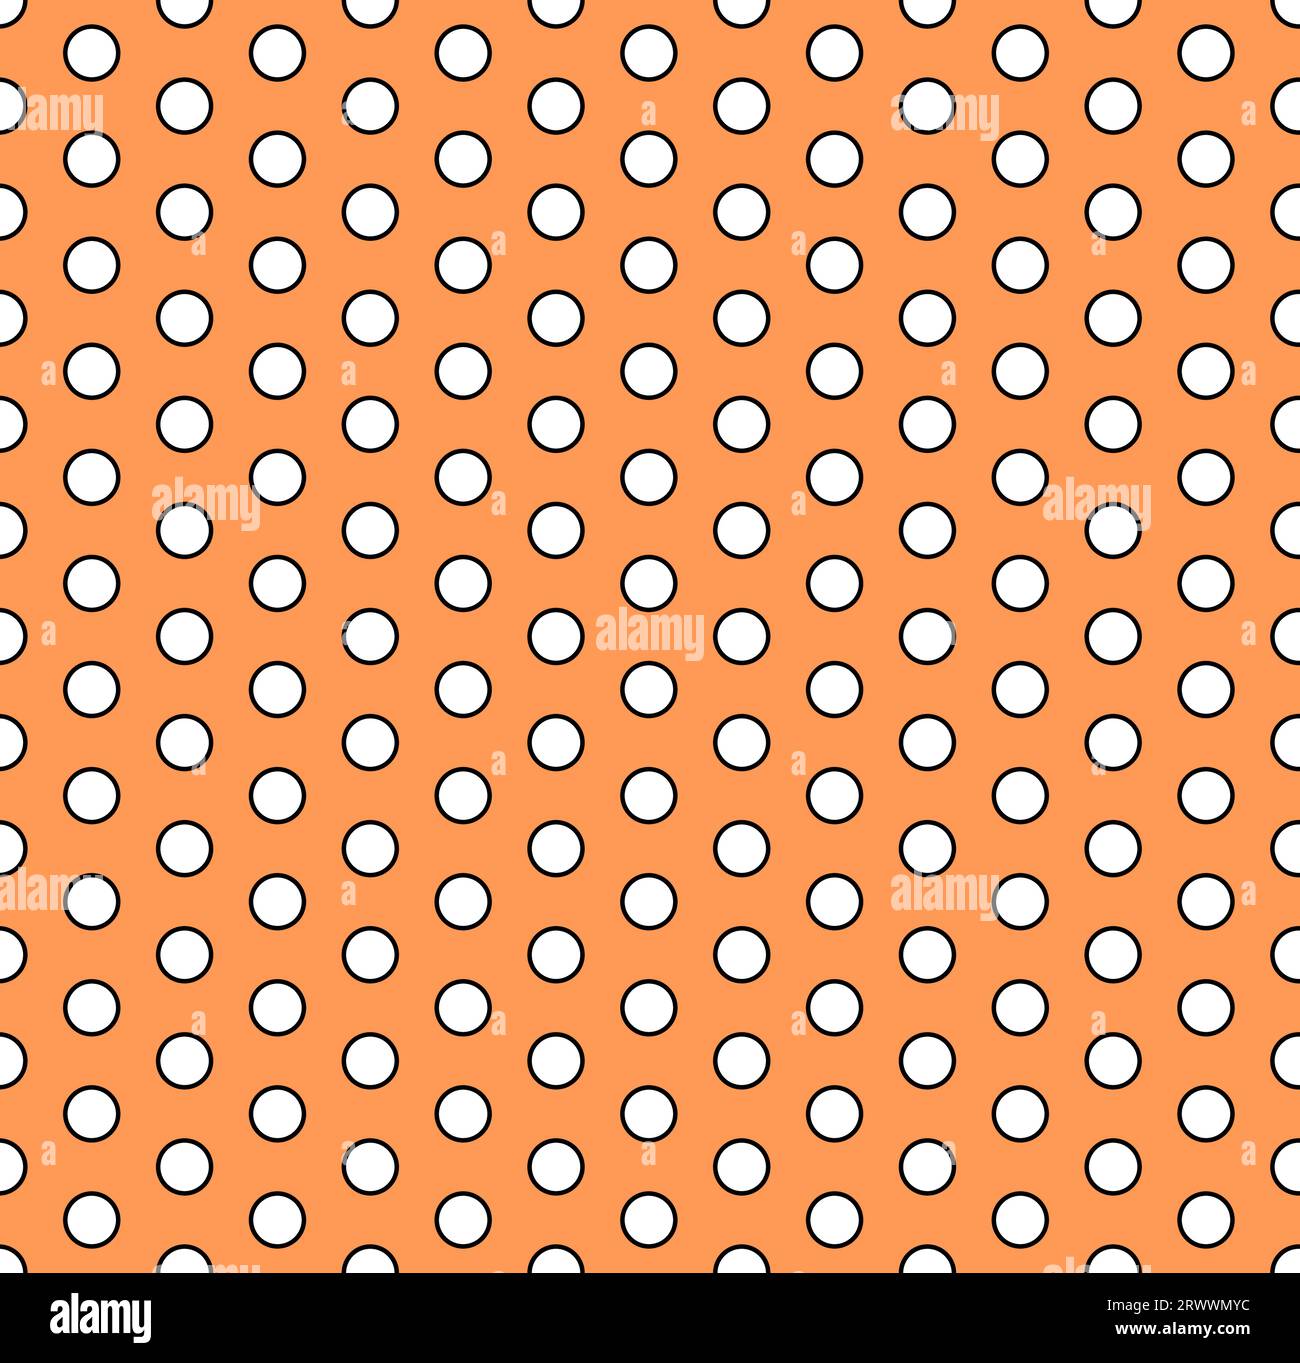 White circles with black outline on orange background. Polka dot style simple line outline rings vector fashion design. Seamless fashion print pattern Stock Vector